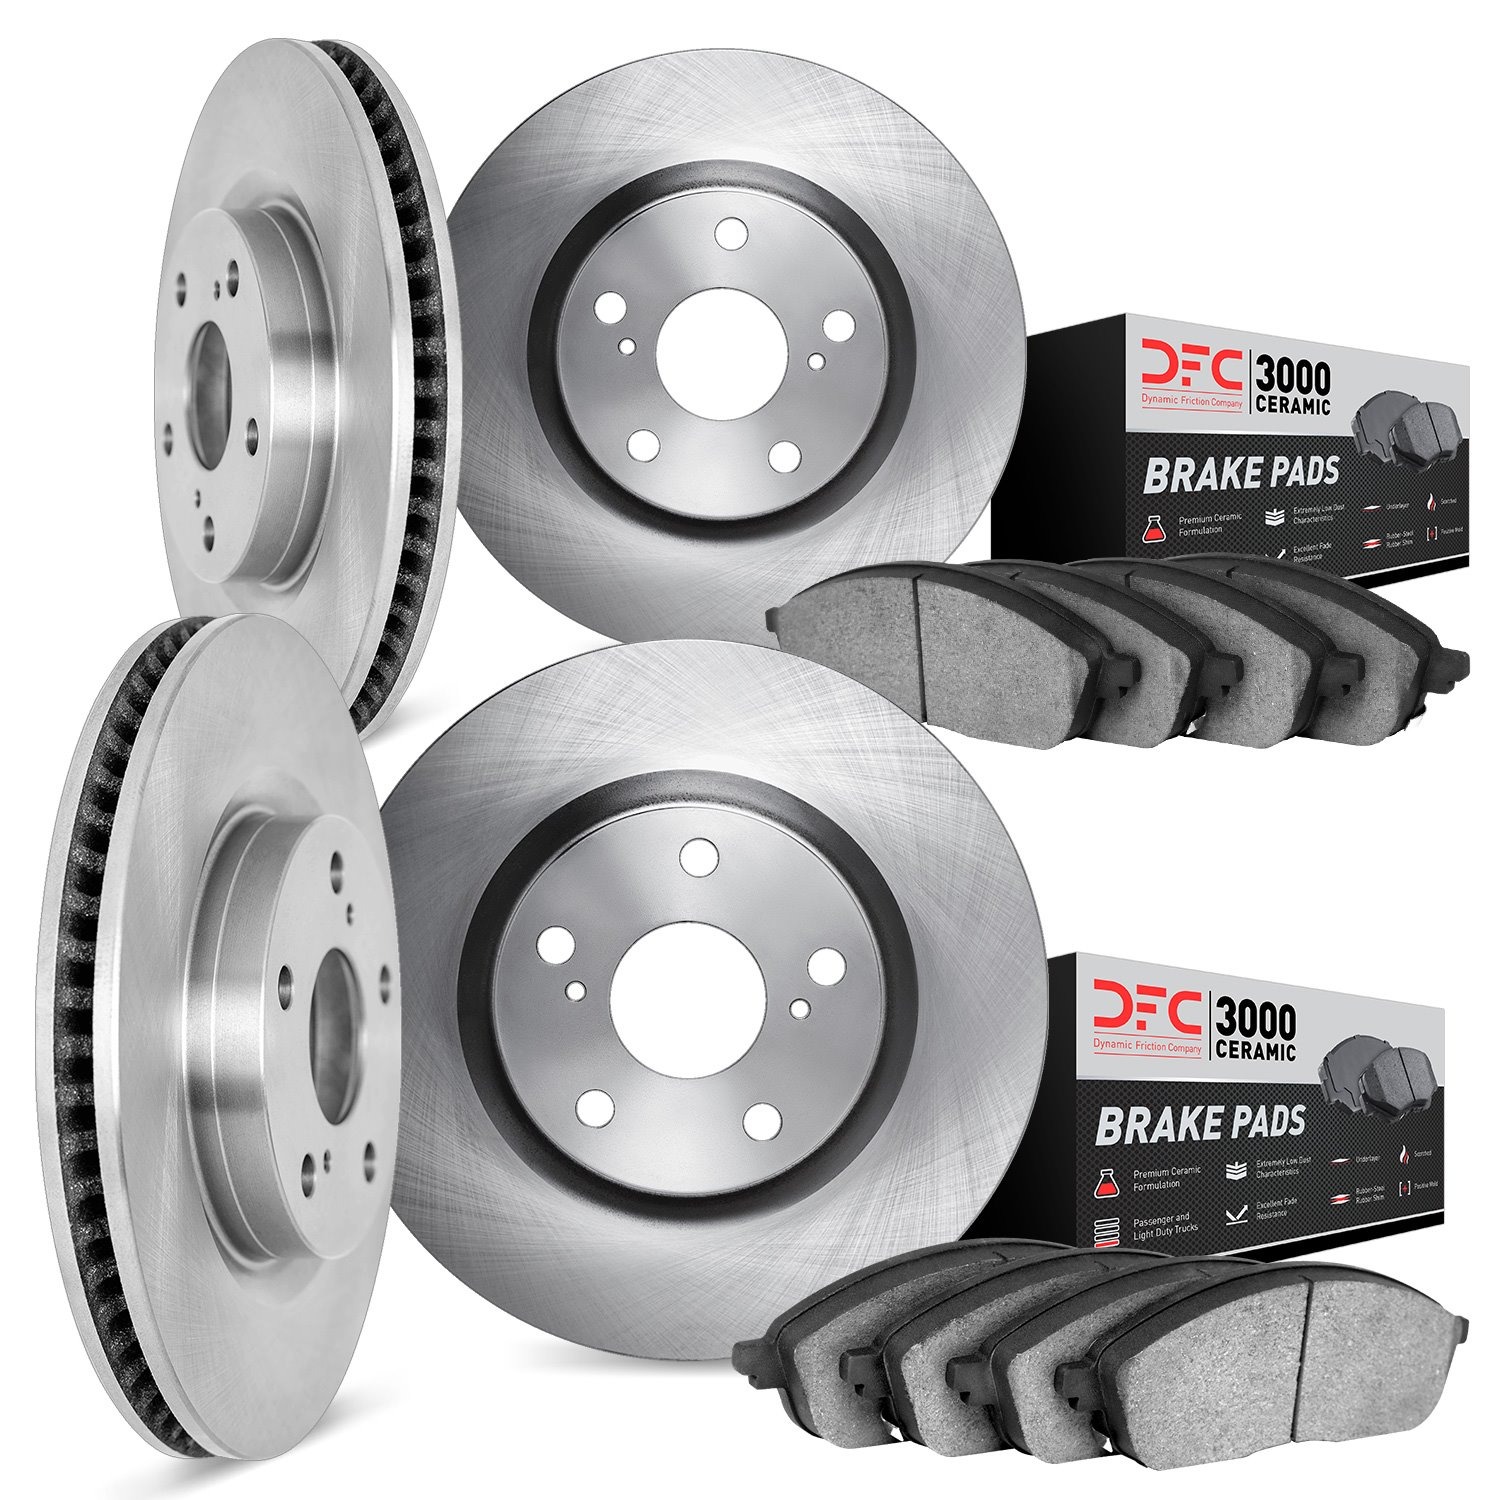 6304-02014 Brake Rotors with 3000-Series Ceramic Brake Pads Kit, 1989-1991 Porsche, Position: Front and Rear